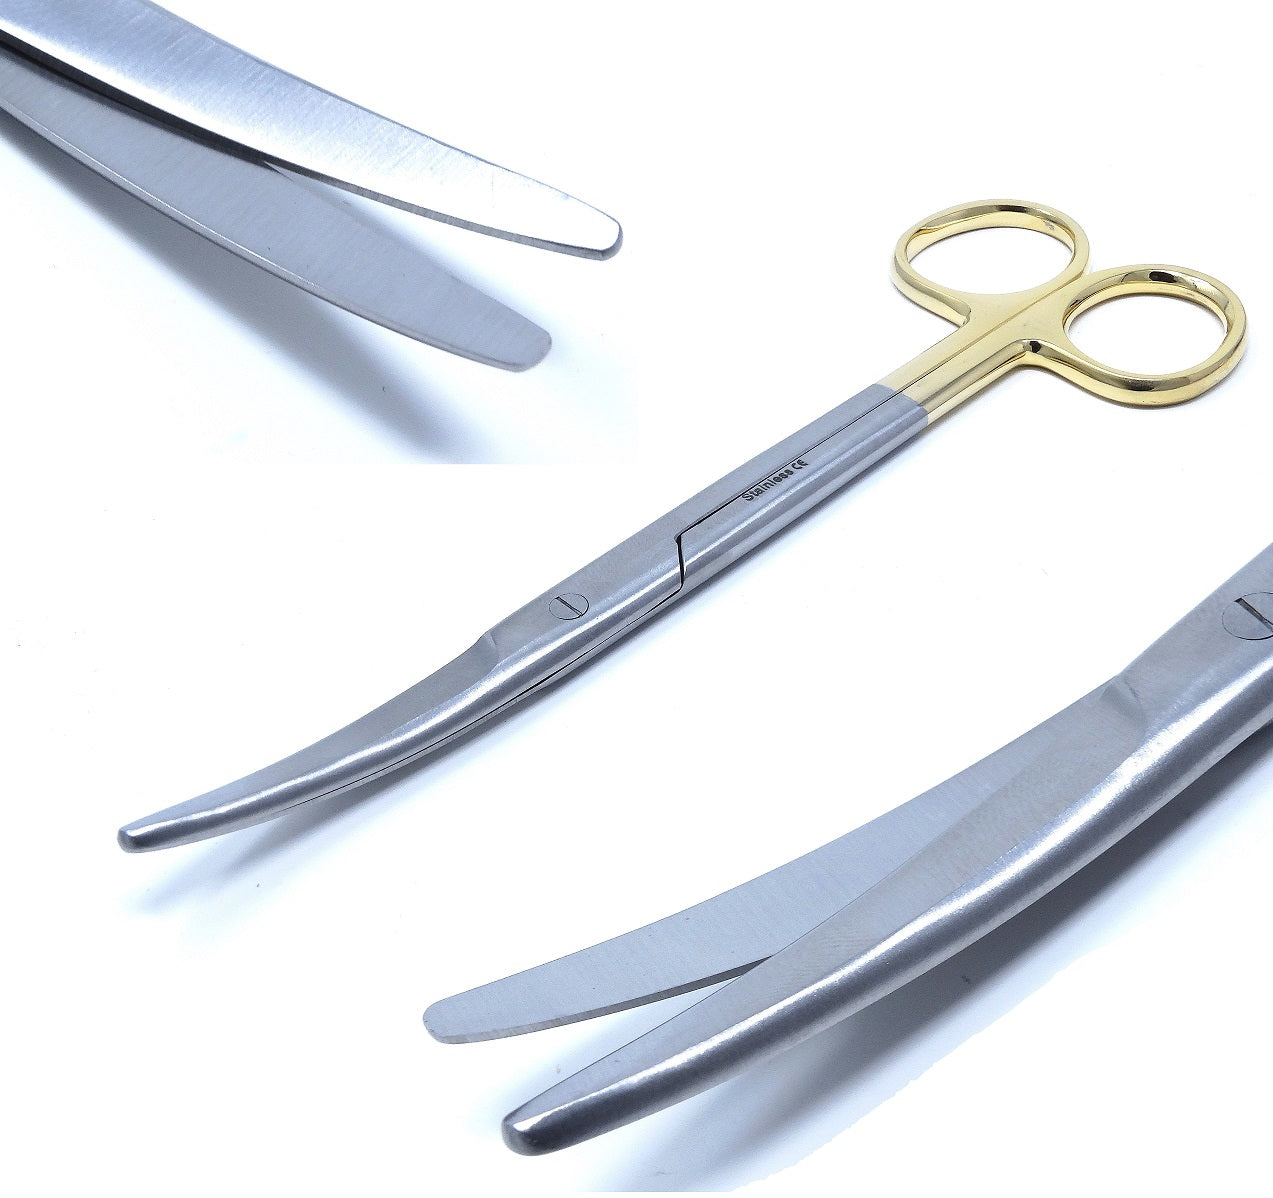 TC Mayo Dissecting Blunt Scissors 5.5", Curved, Stainless Steel